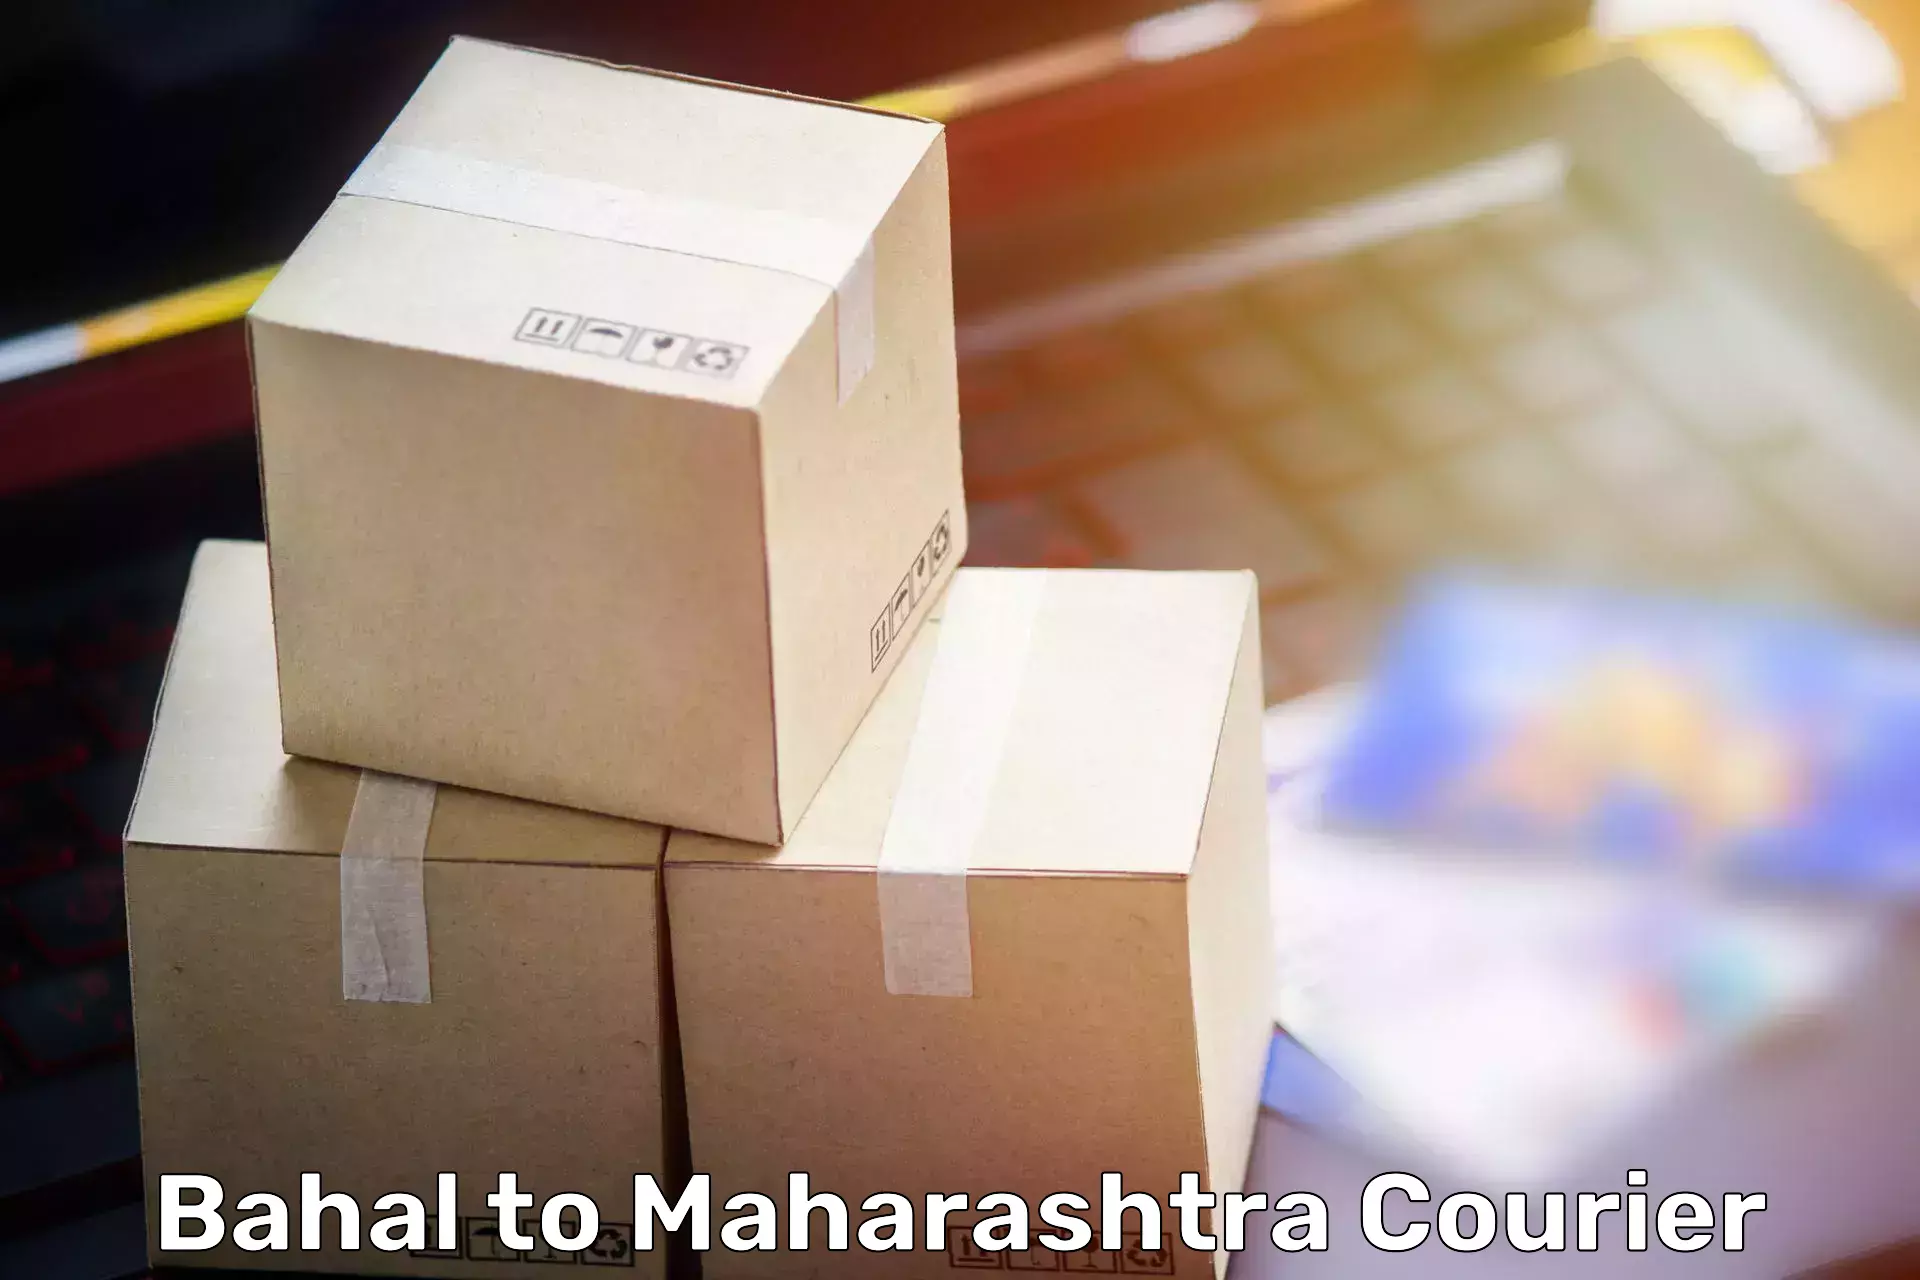 Comprehensive moving services in Bahal to Nandura